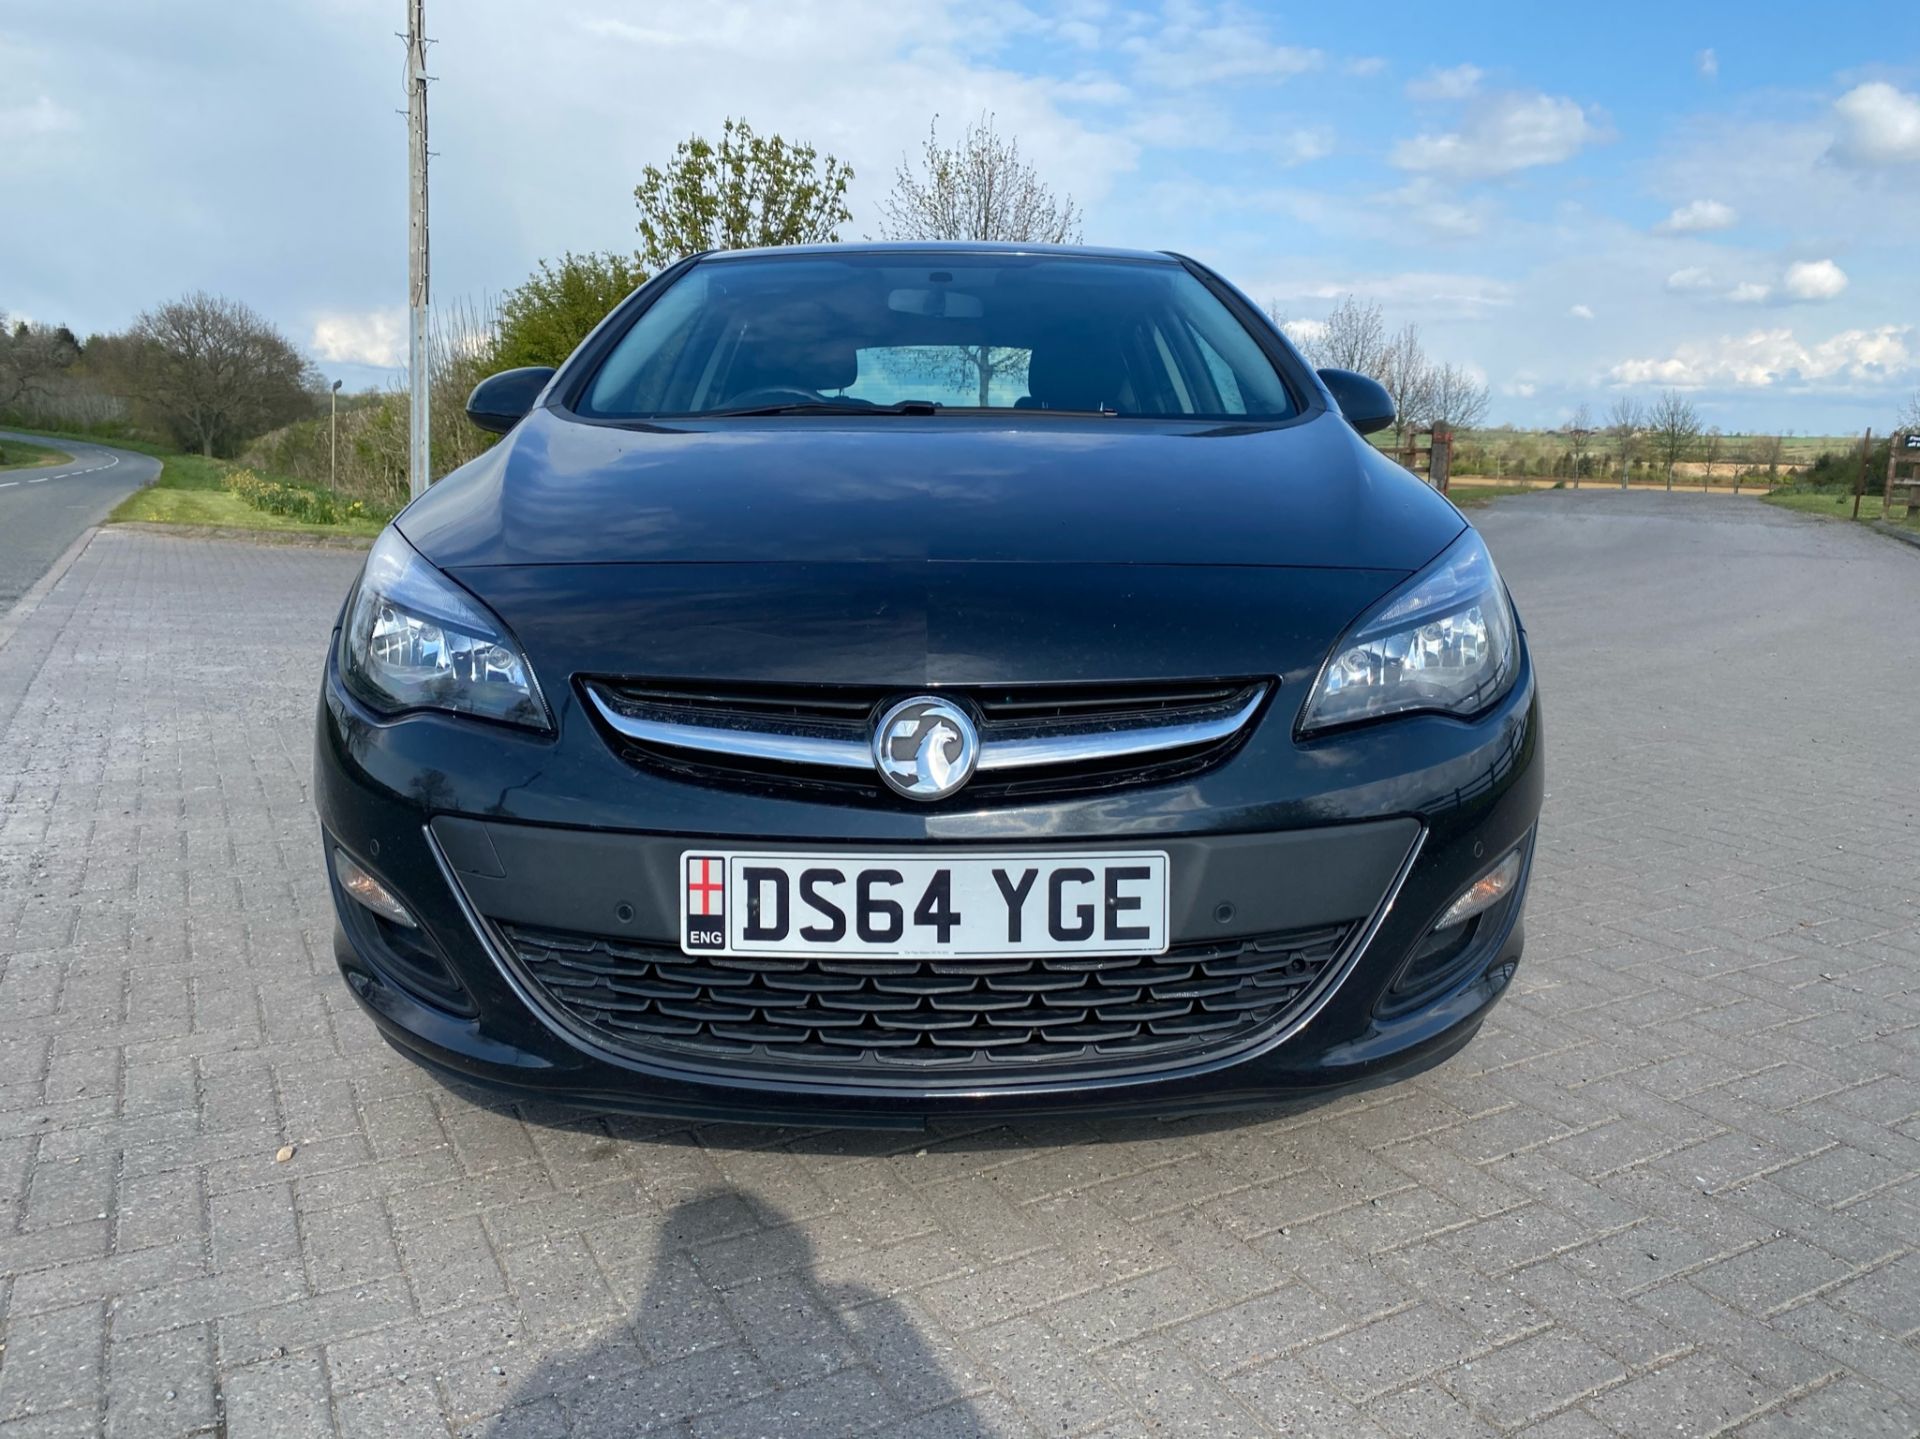 ON SALE VAUXHALL ASTRA 1.6 CDTI "ECO' "DESIGN" 5 DOOR HATCHBACK - AIR CON - NEW SHAPE - 2015 MODEL - - Image 2 of 14